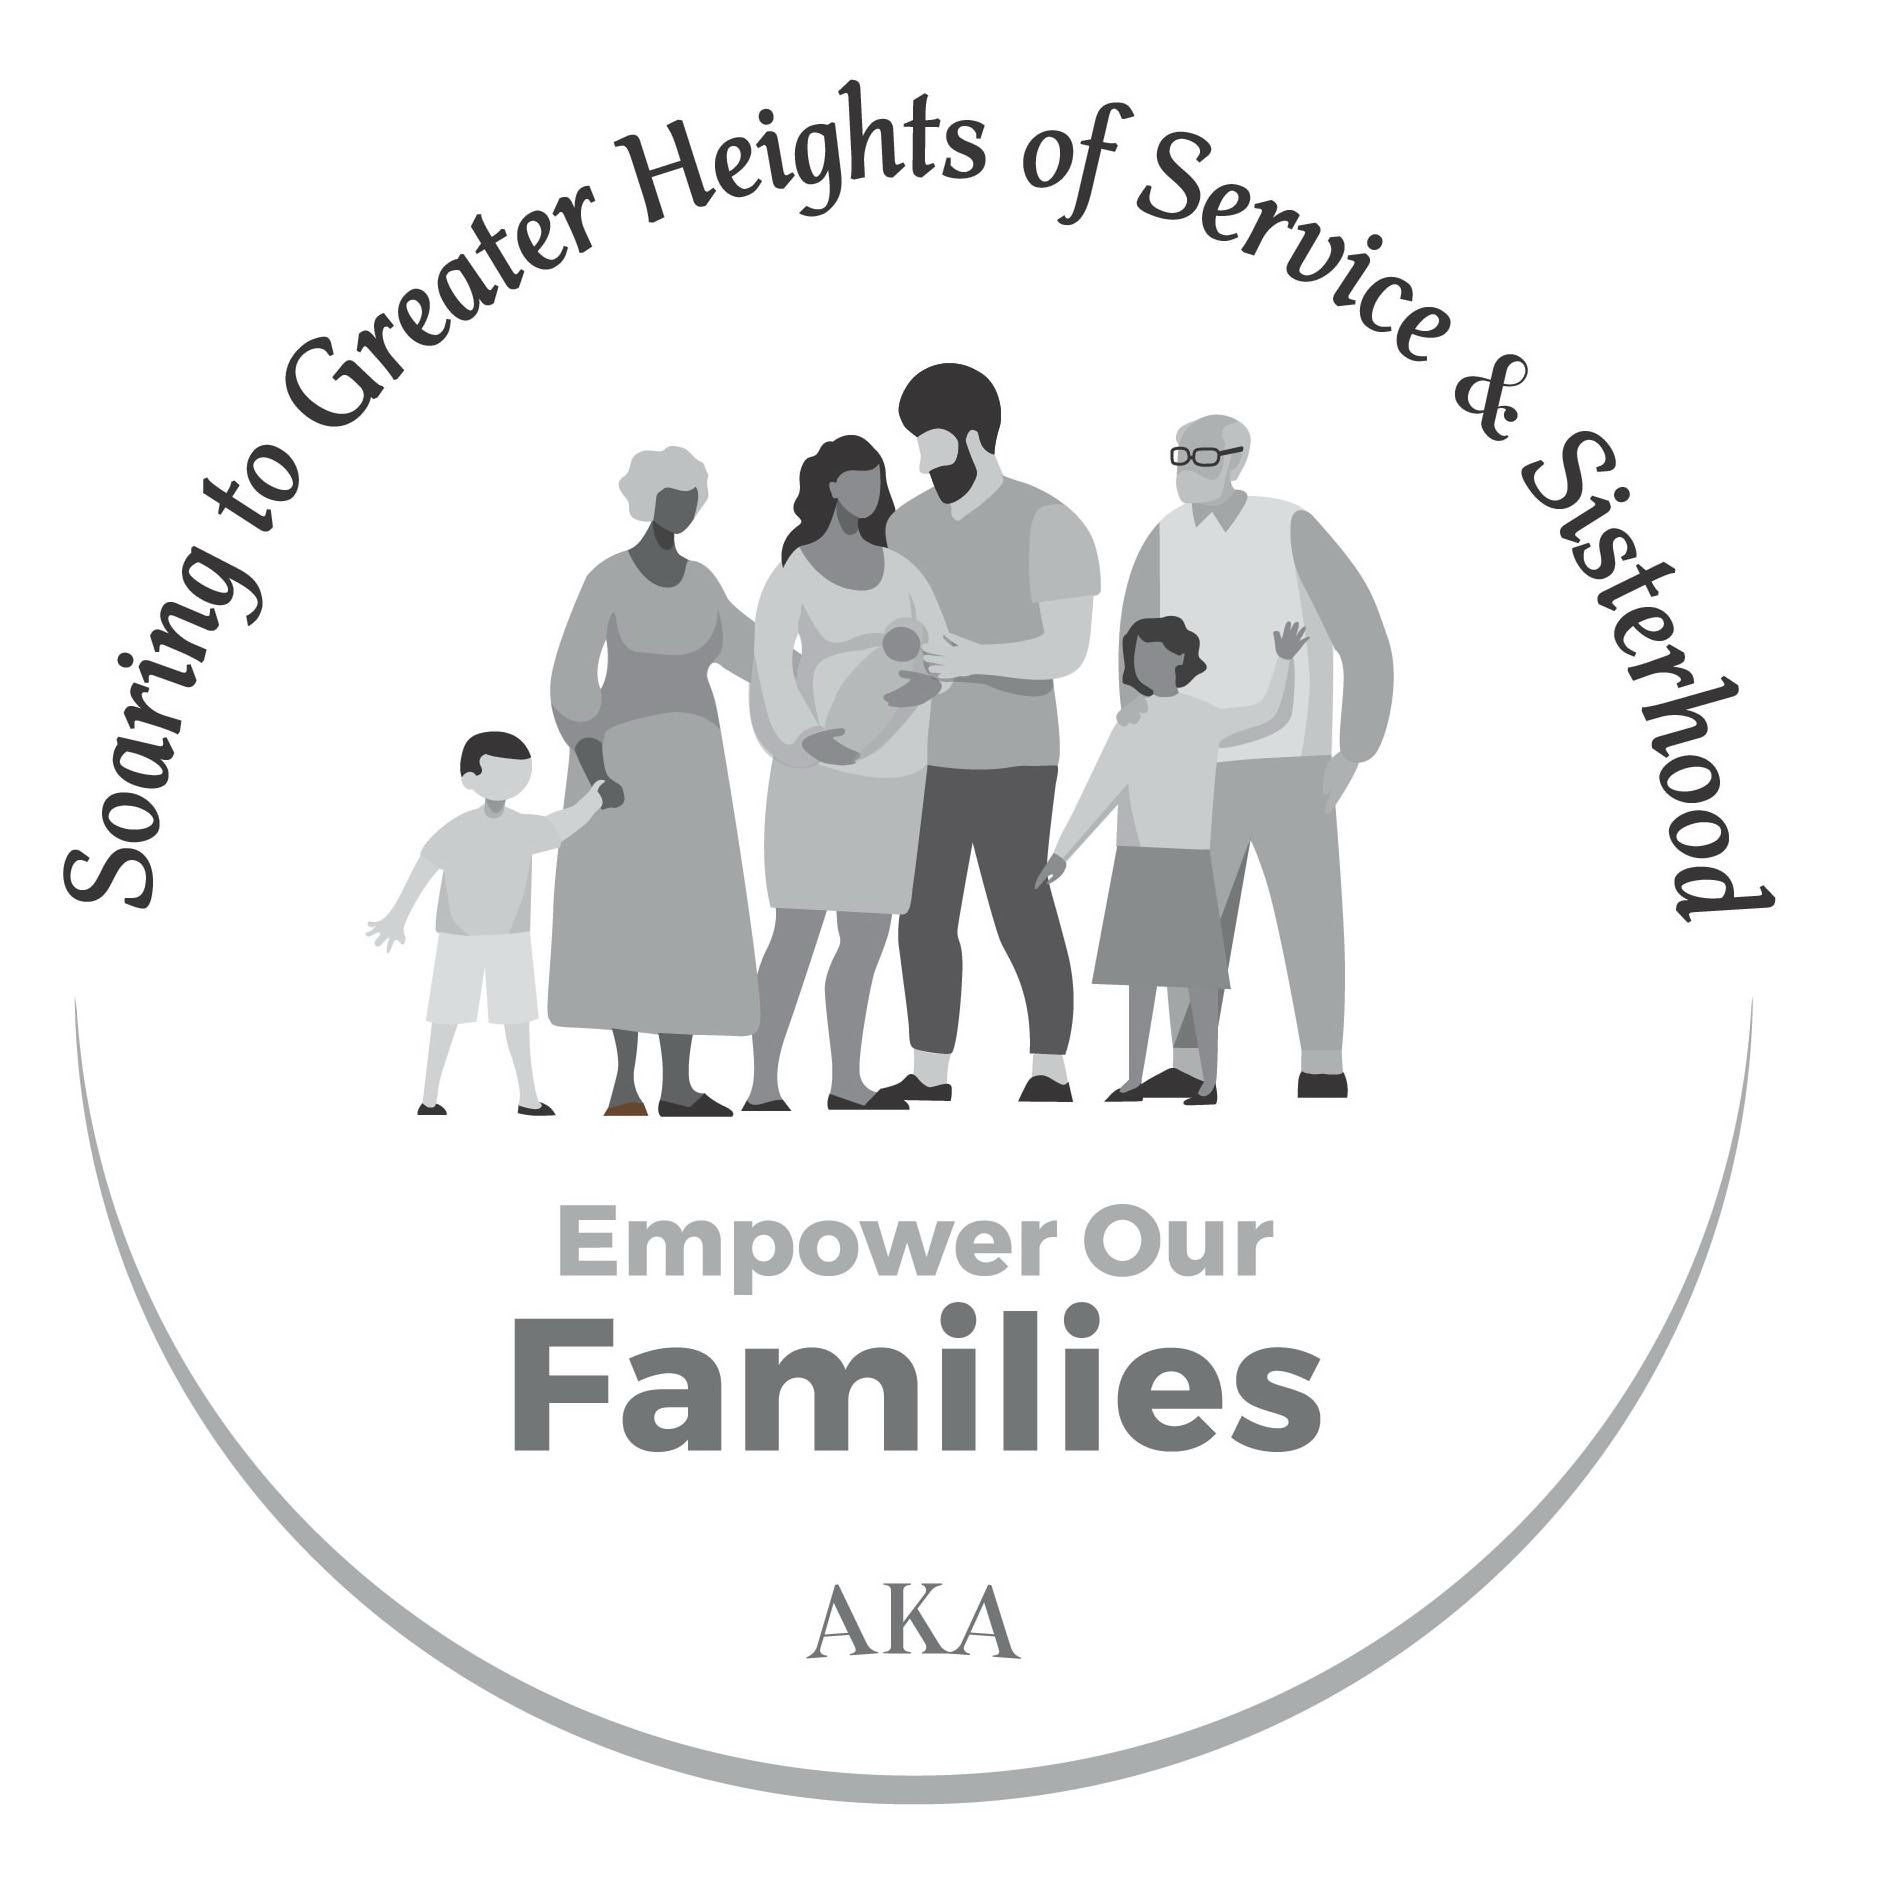  SOARING TO GREATER HEIGHTS OF SERVICE &amp; SISTERHOOD EMPOWER OUR FAMILIES AKA